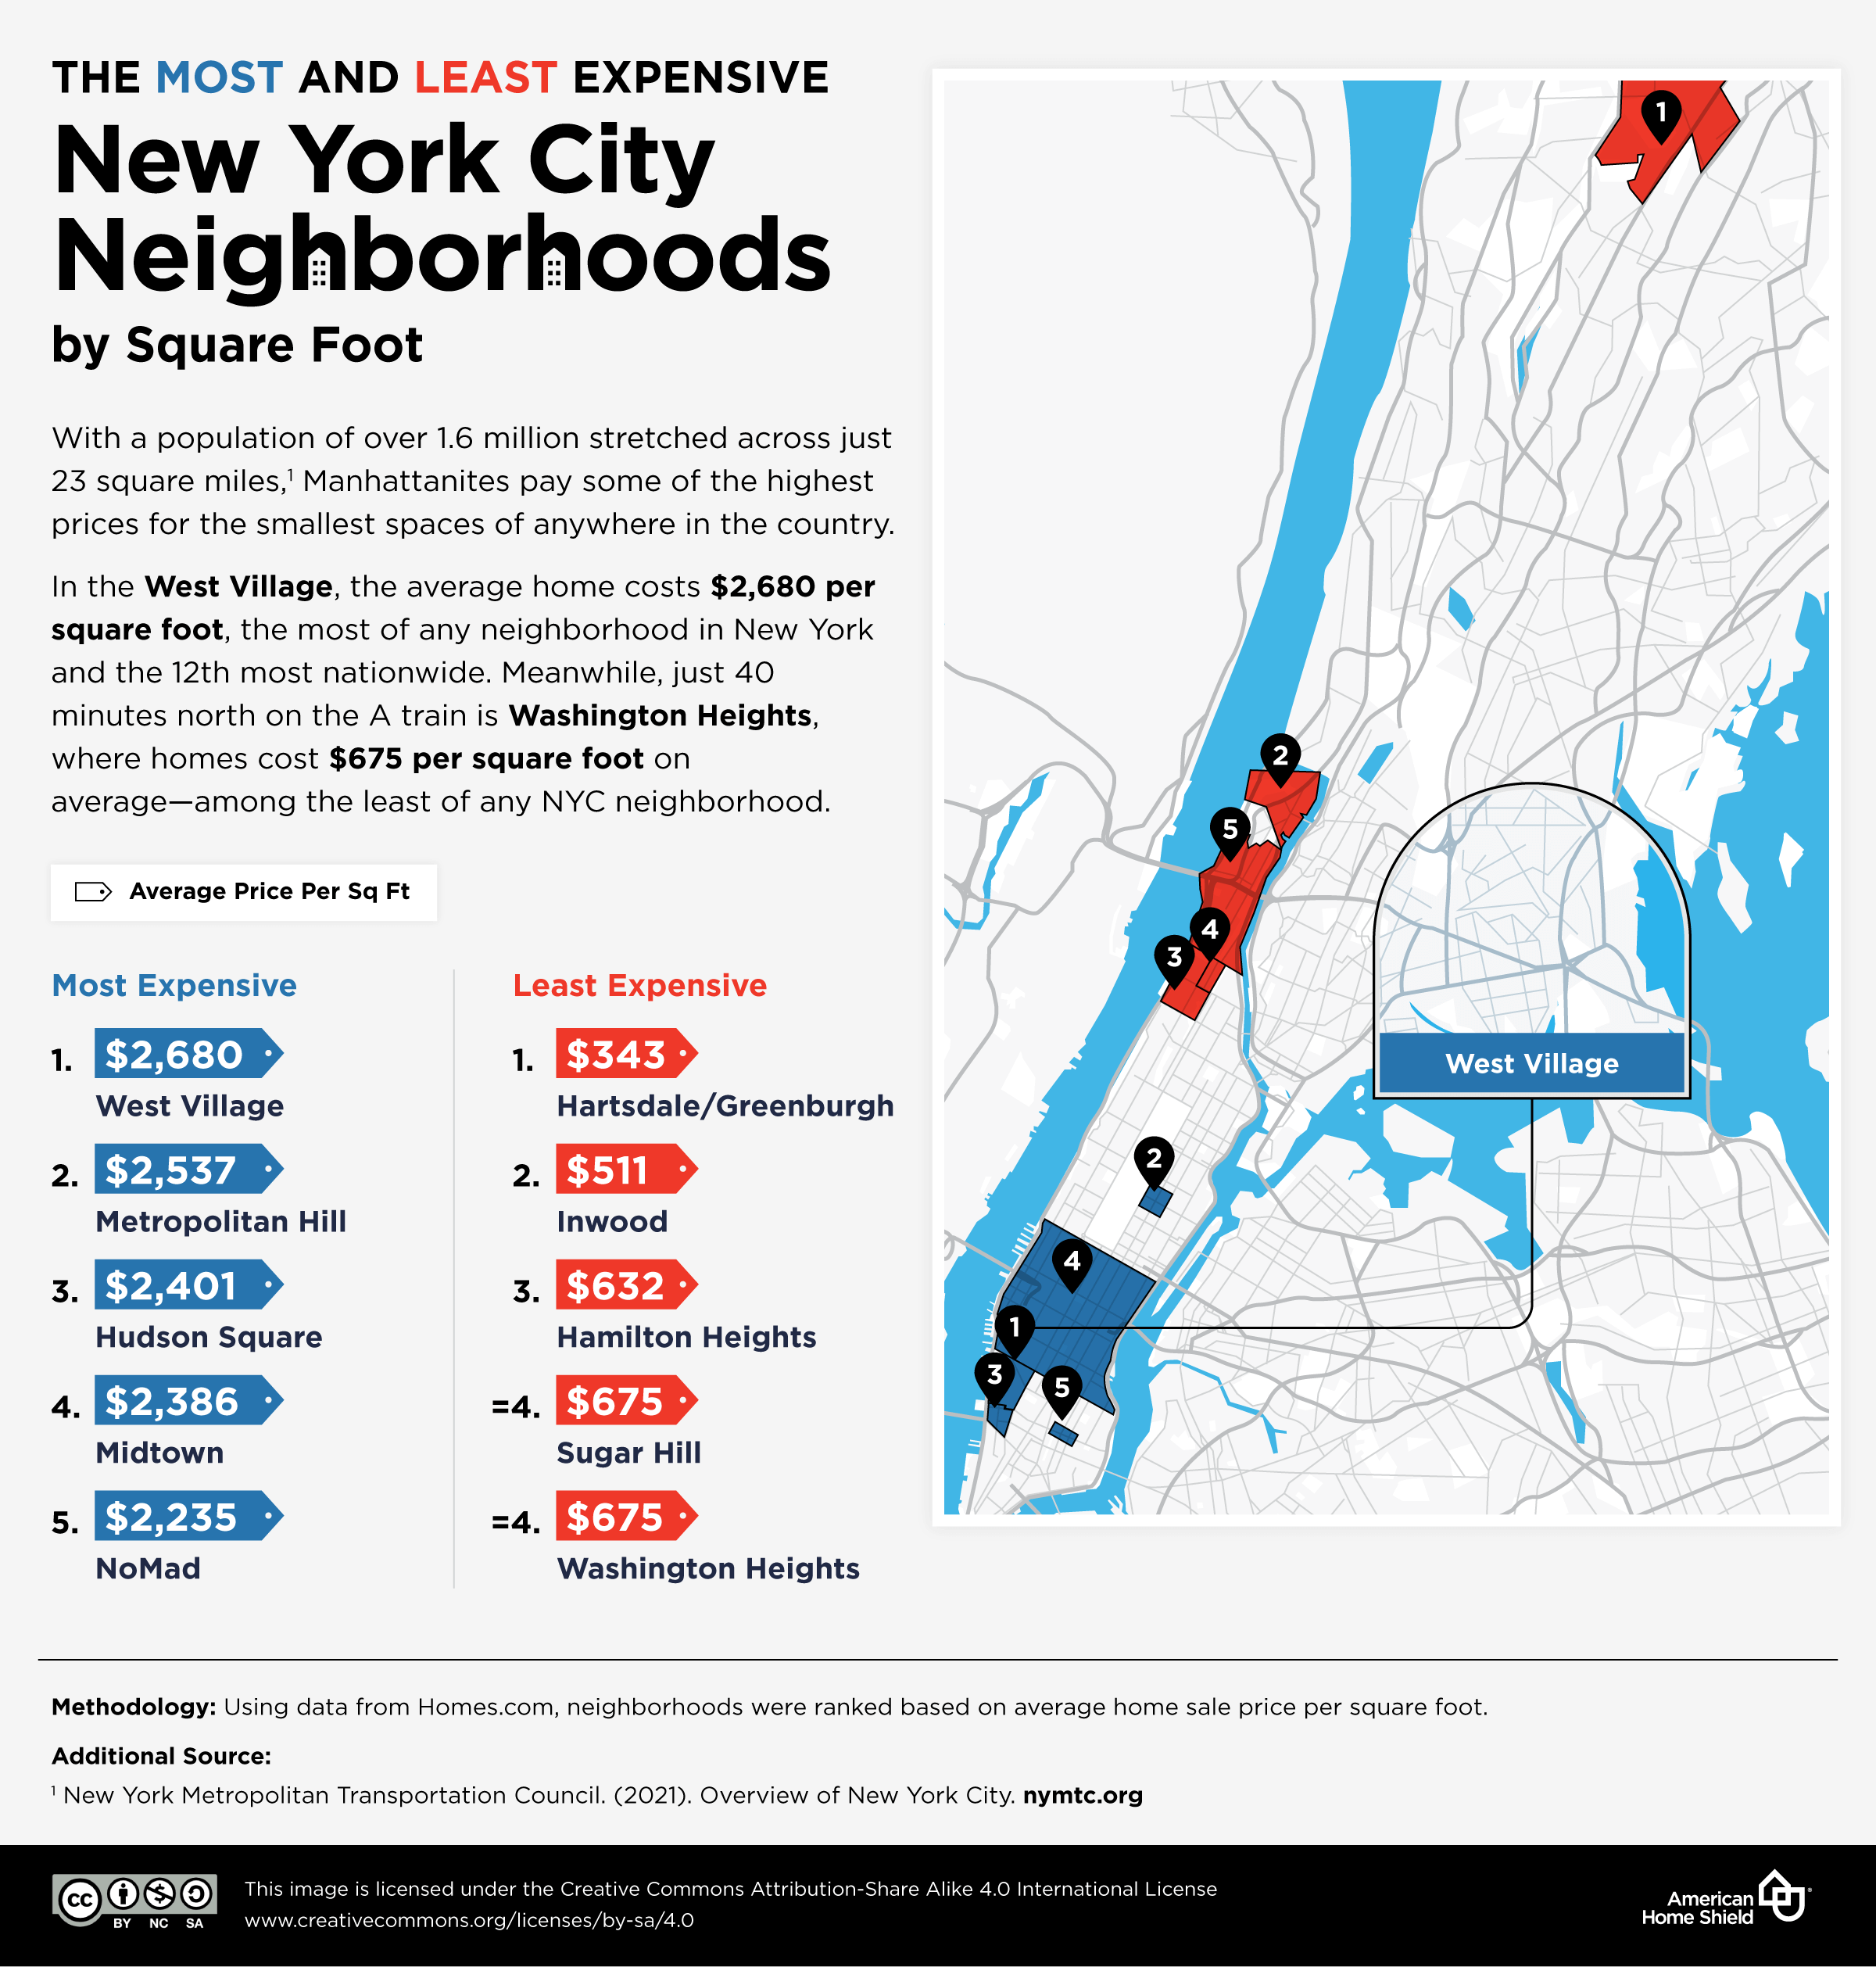 Most - least expensive NYC neighborhoods per sq ft.